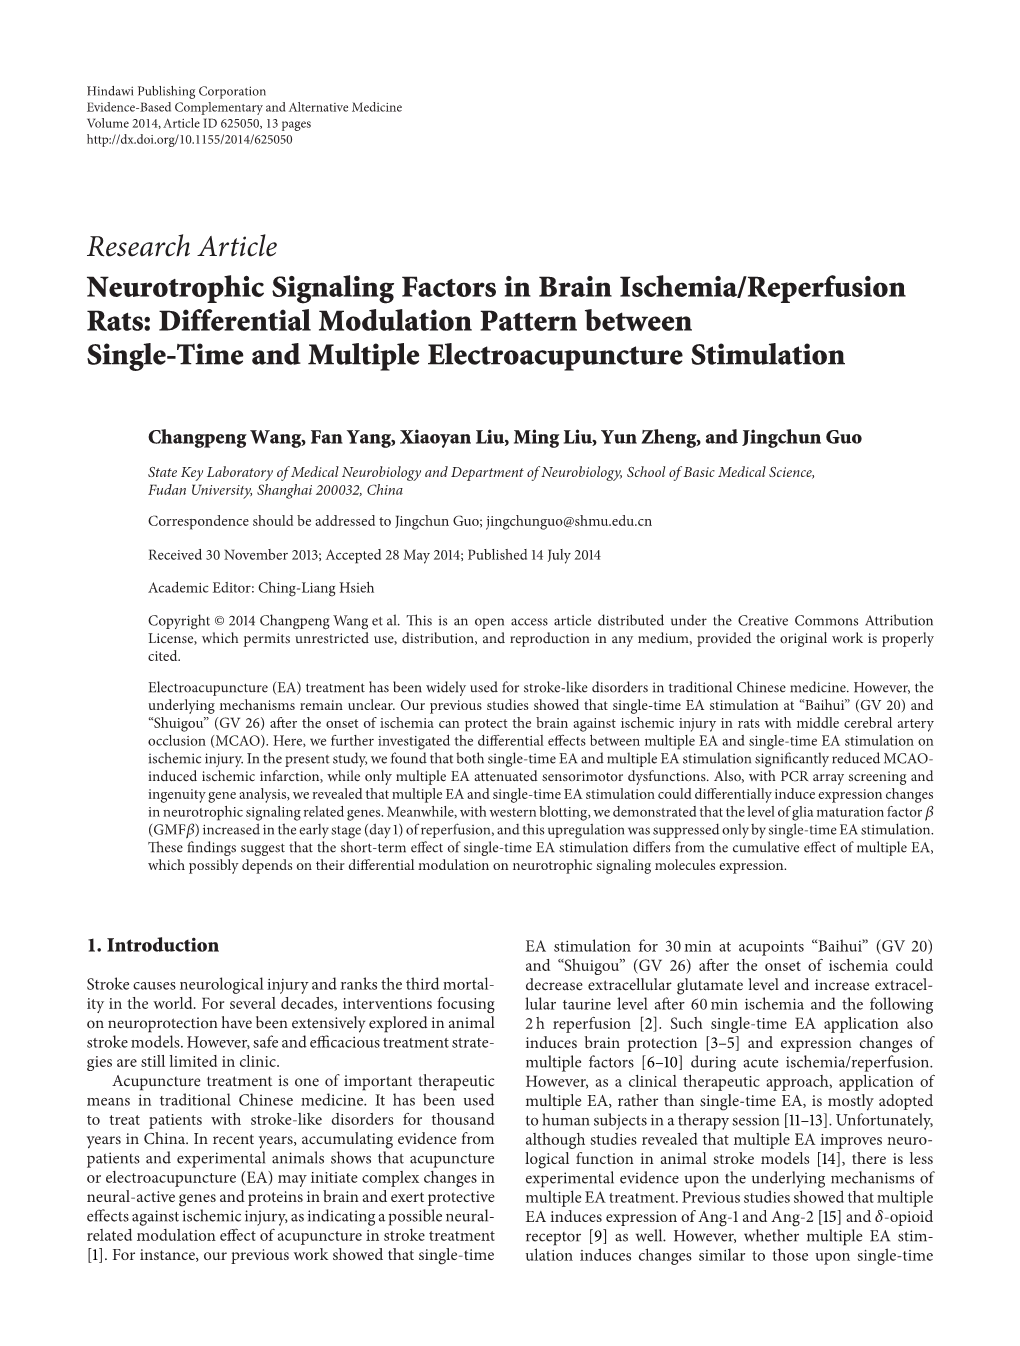 Neurotrophic Signaling Factors in Brain Ischemia/Reperfusion Rats: Differential Modulation Pattern Between Single-Time and Multiple Electroacupuncture Stimulation